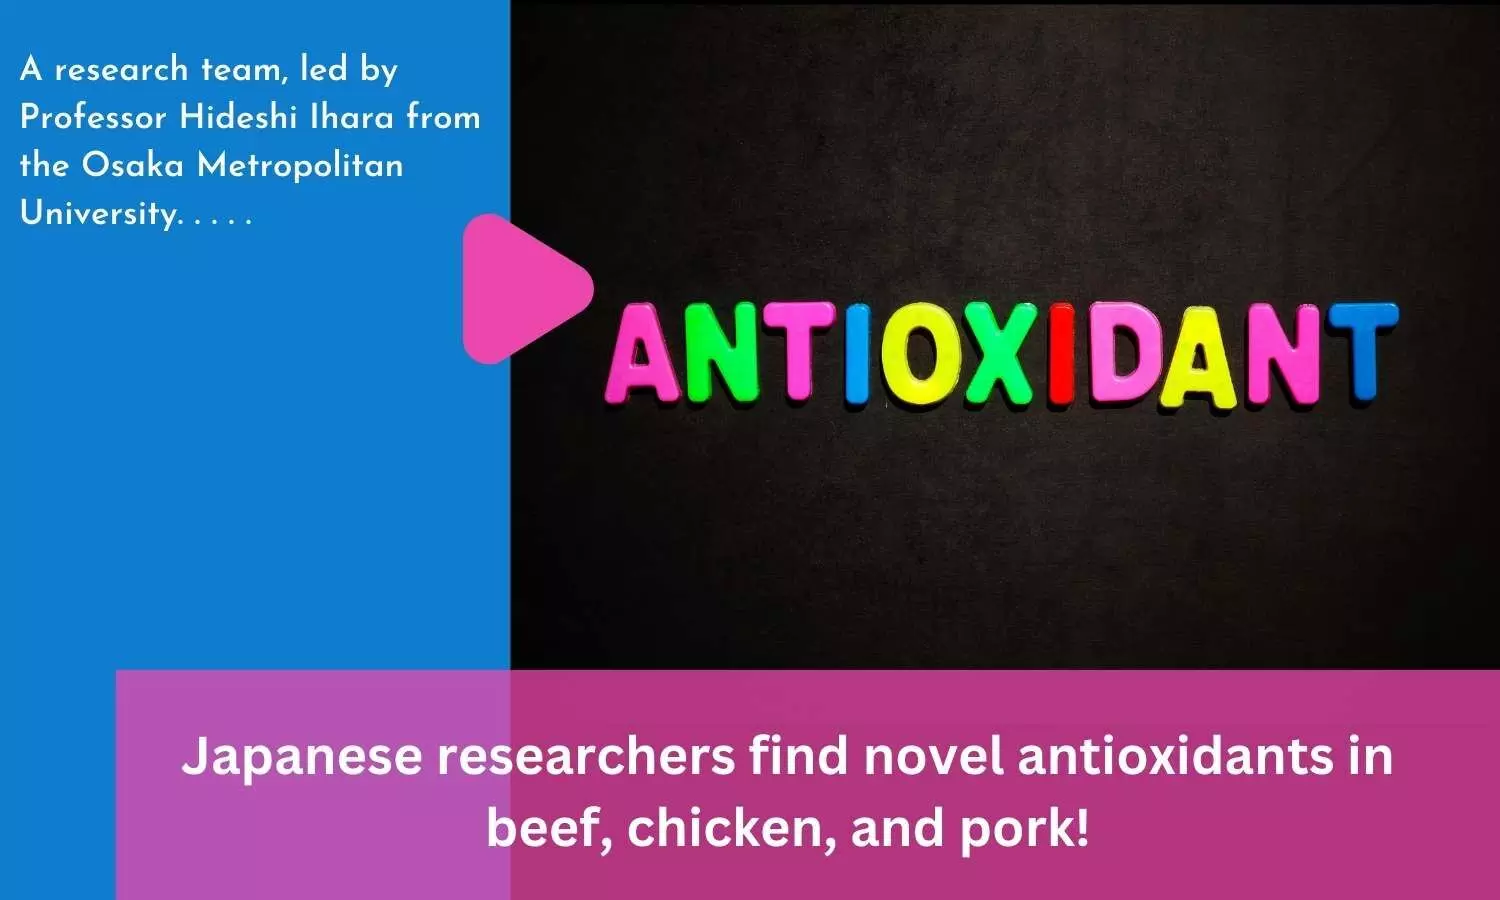 Japanese researchers find novel antioxidants in beef, chicken, and pork!